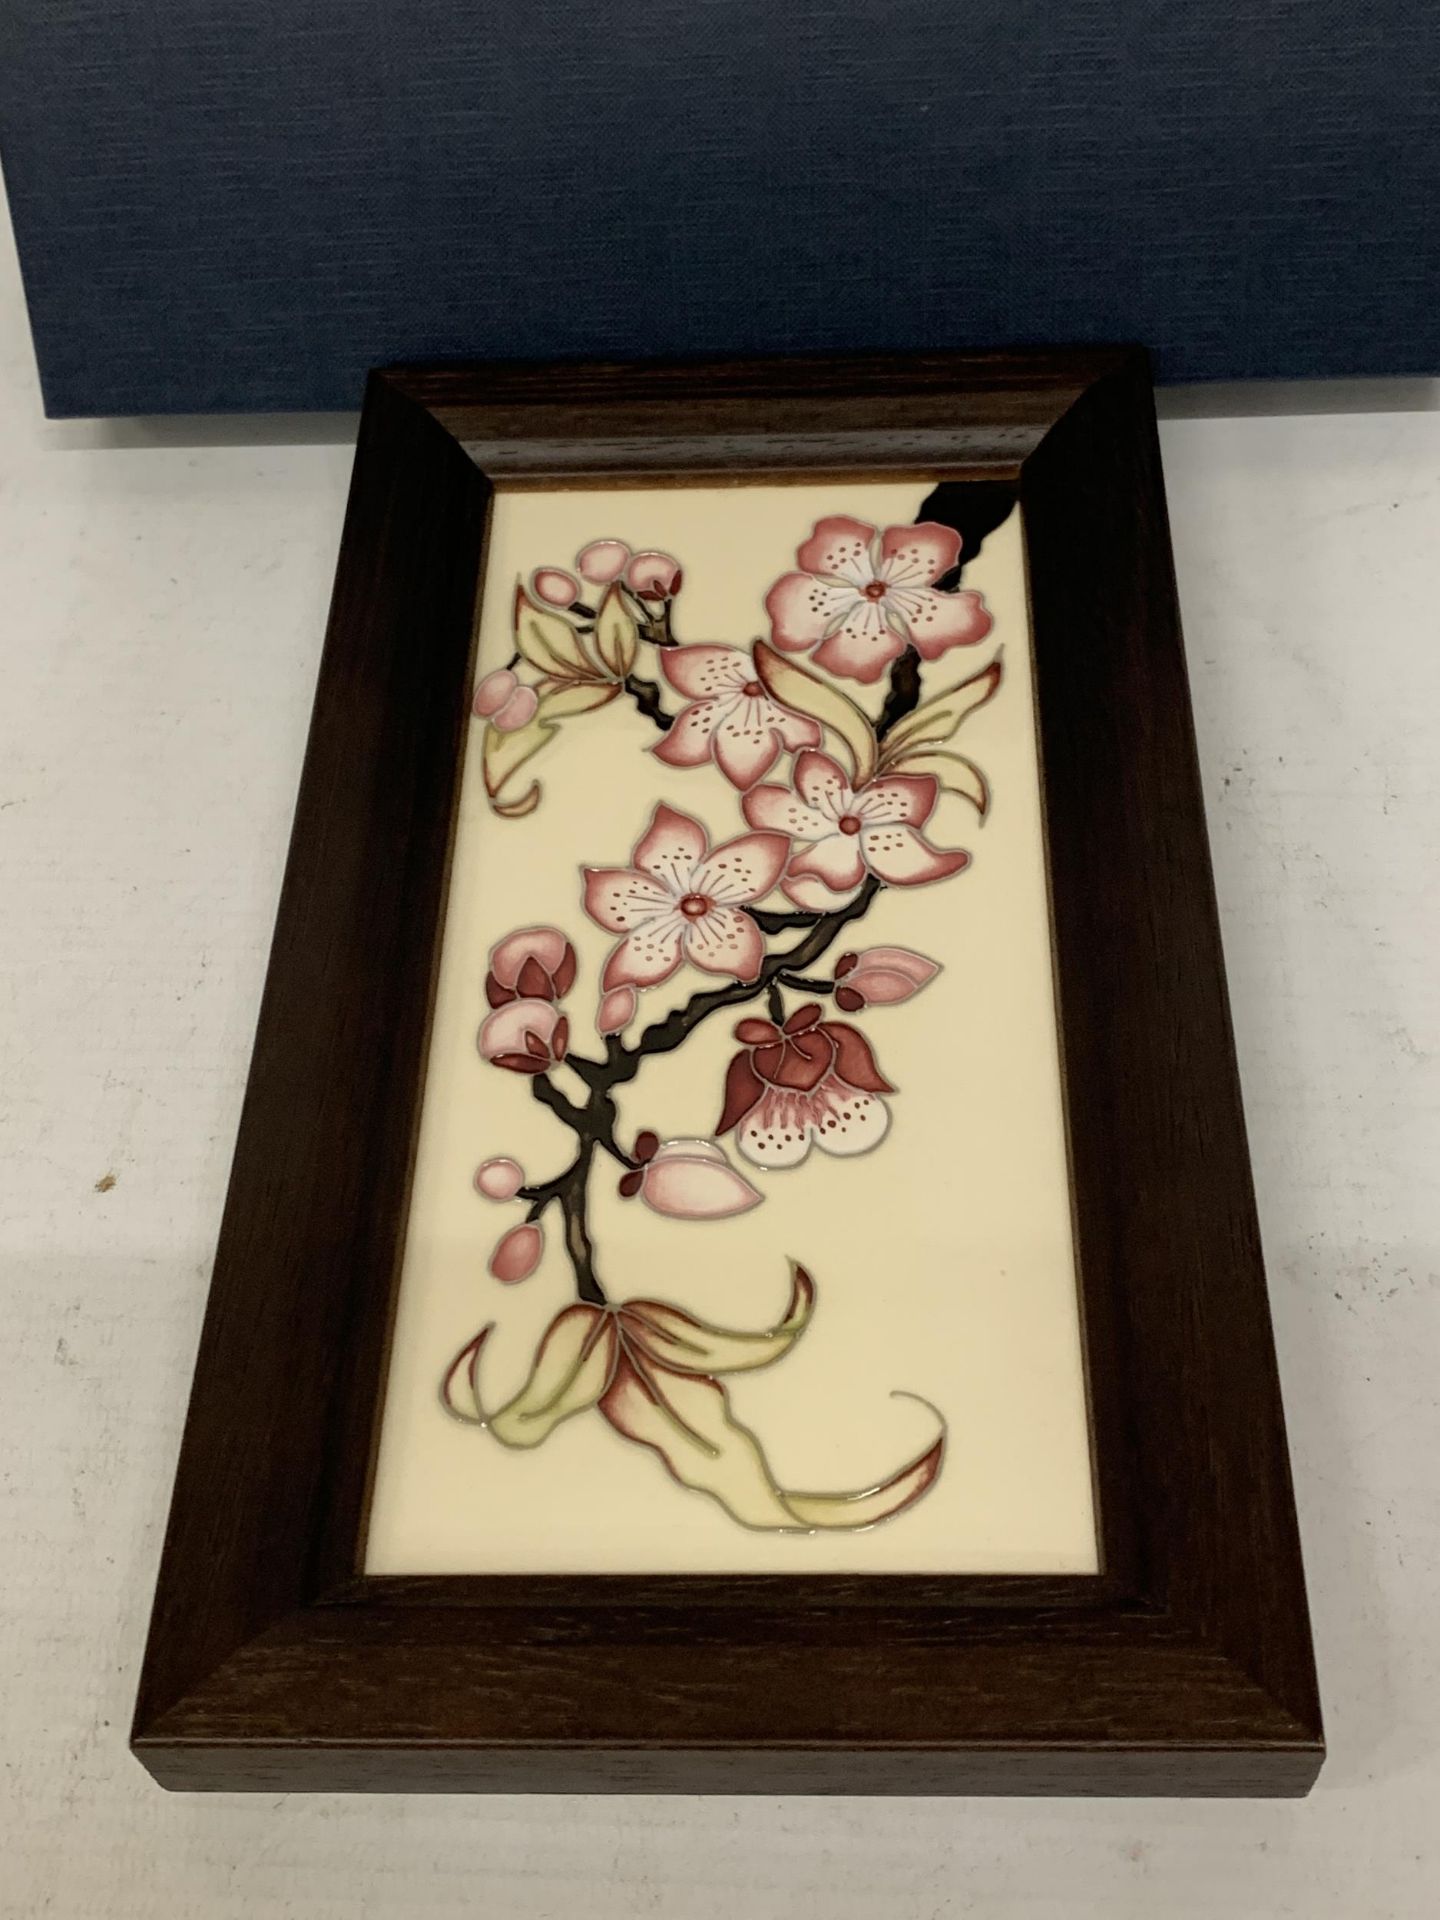 A BOXED MOORCROFT FRAMED PLAQUE "BUTTERWORTH" LIMITED EDITION 2/75 - Image 2 of 3